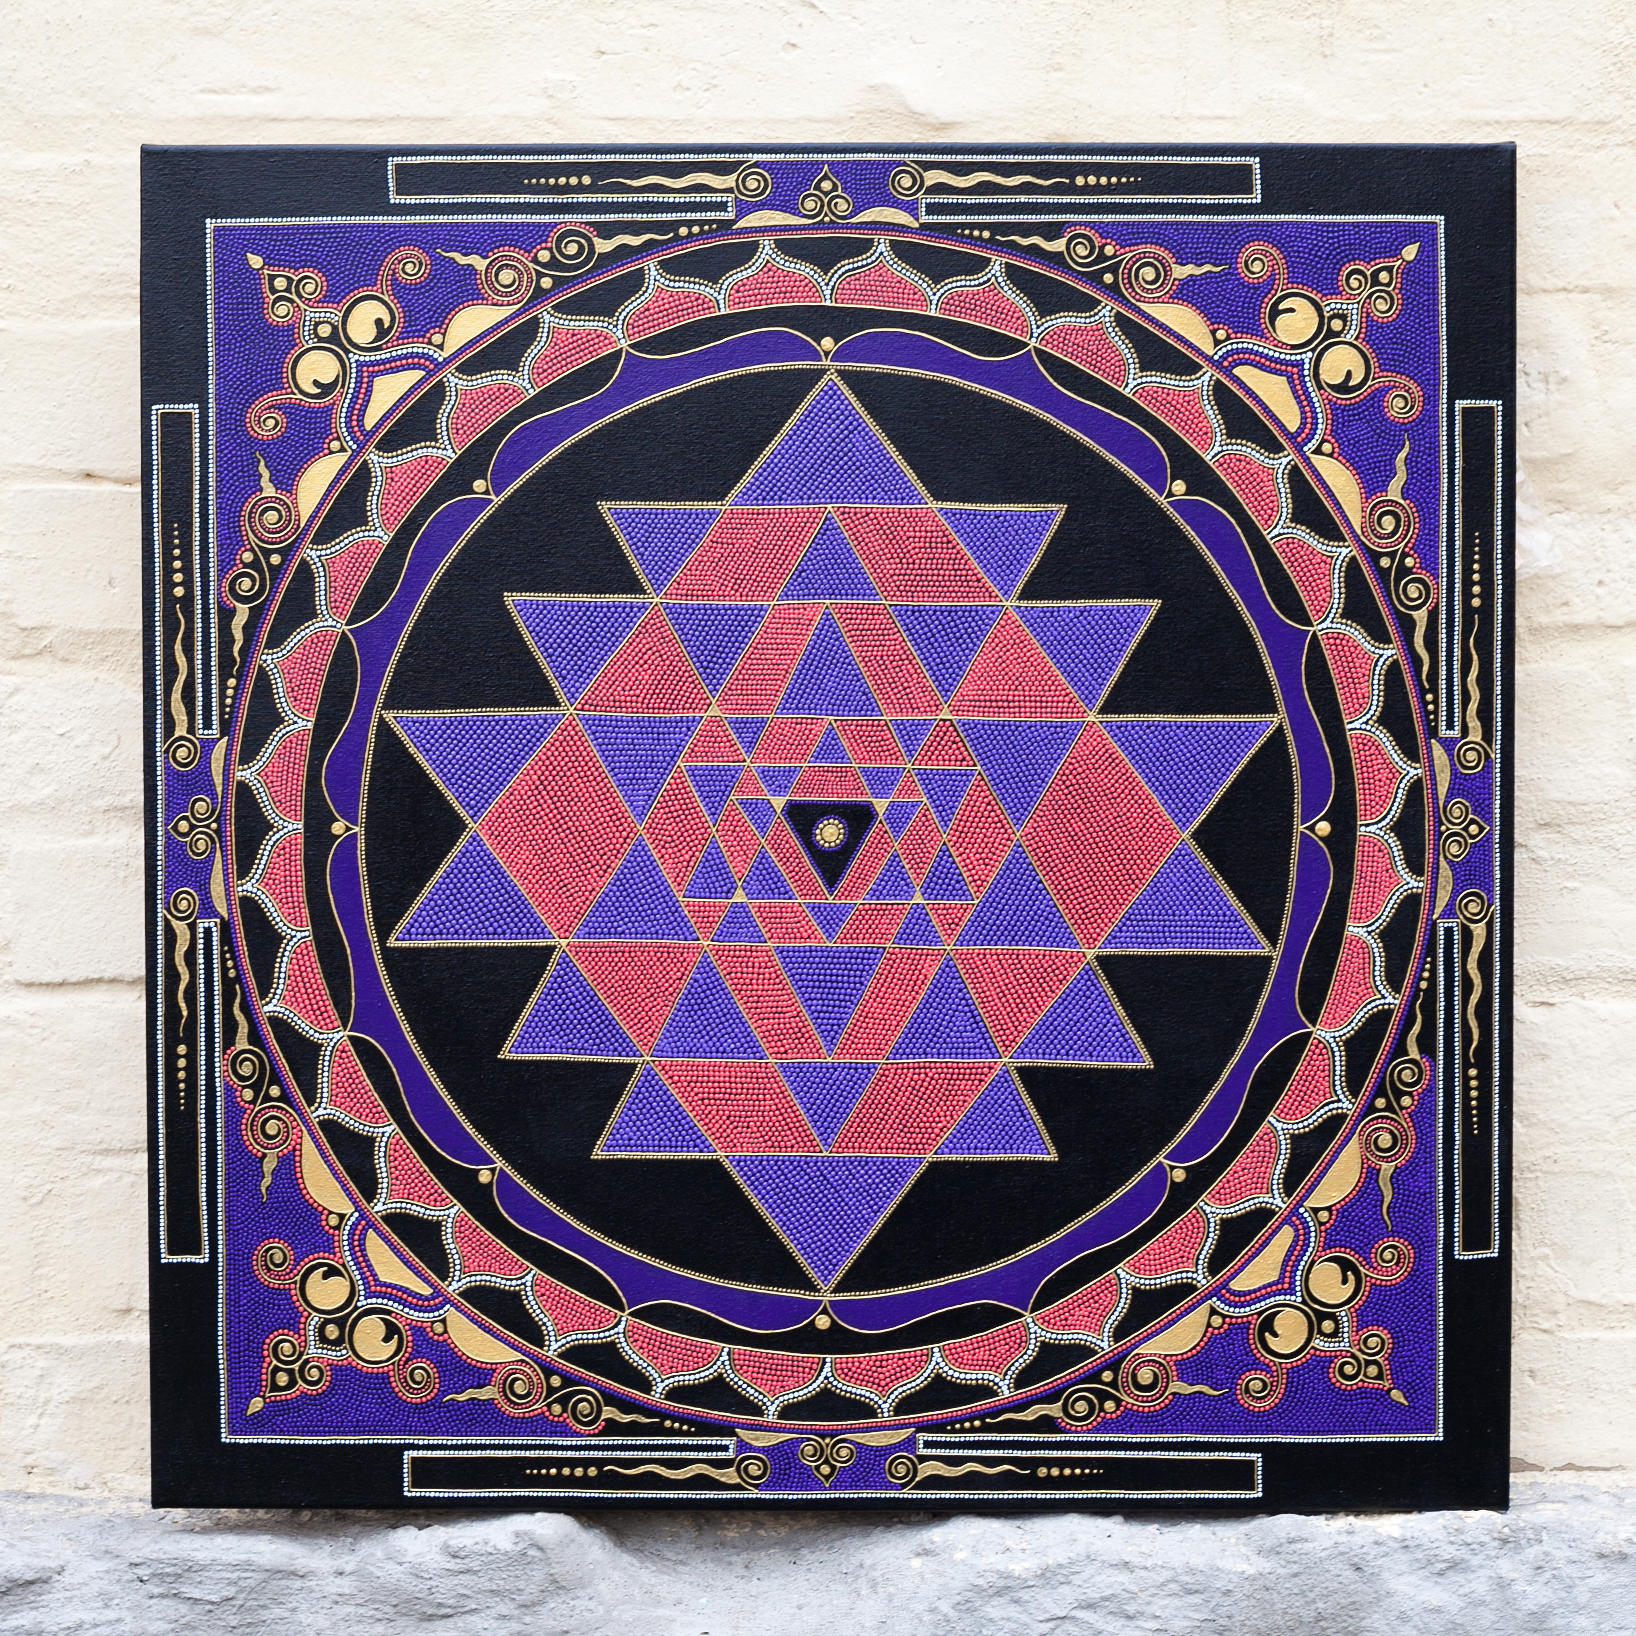 Sri Yantra painting on canvas, sacred geometry spiritual art for wall in bedroom, living room, meditation room. Purple, pink and gold colors, front view. Size 40x40 cm (16×16 inches), 50x50 cm (20×20 inches) or 60x60 cm (24×24 inches)